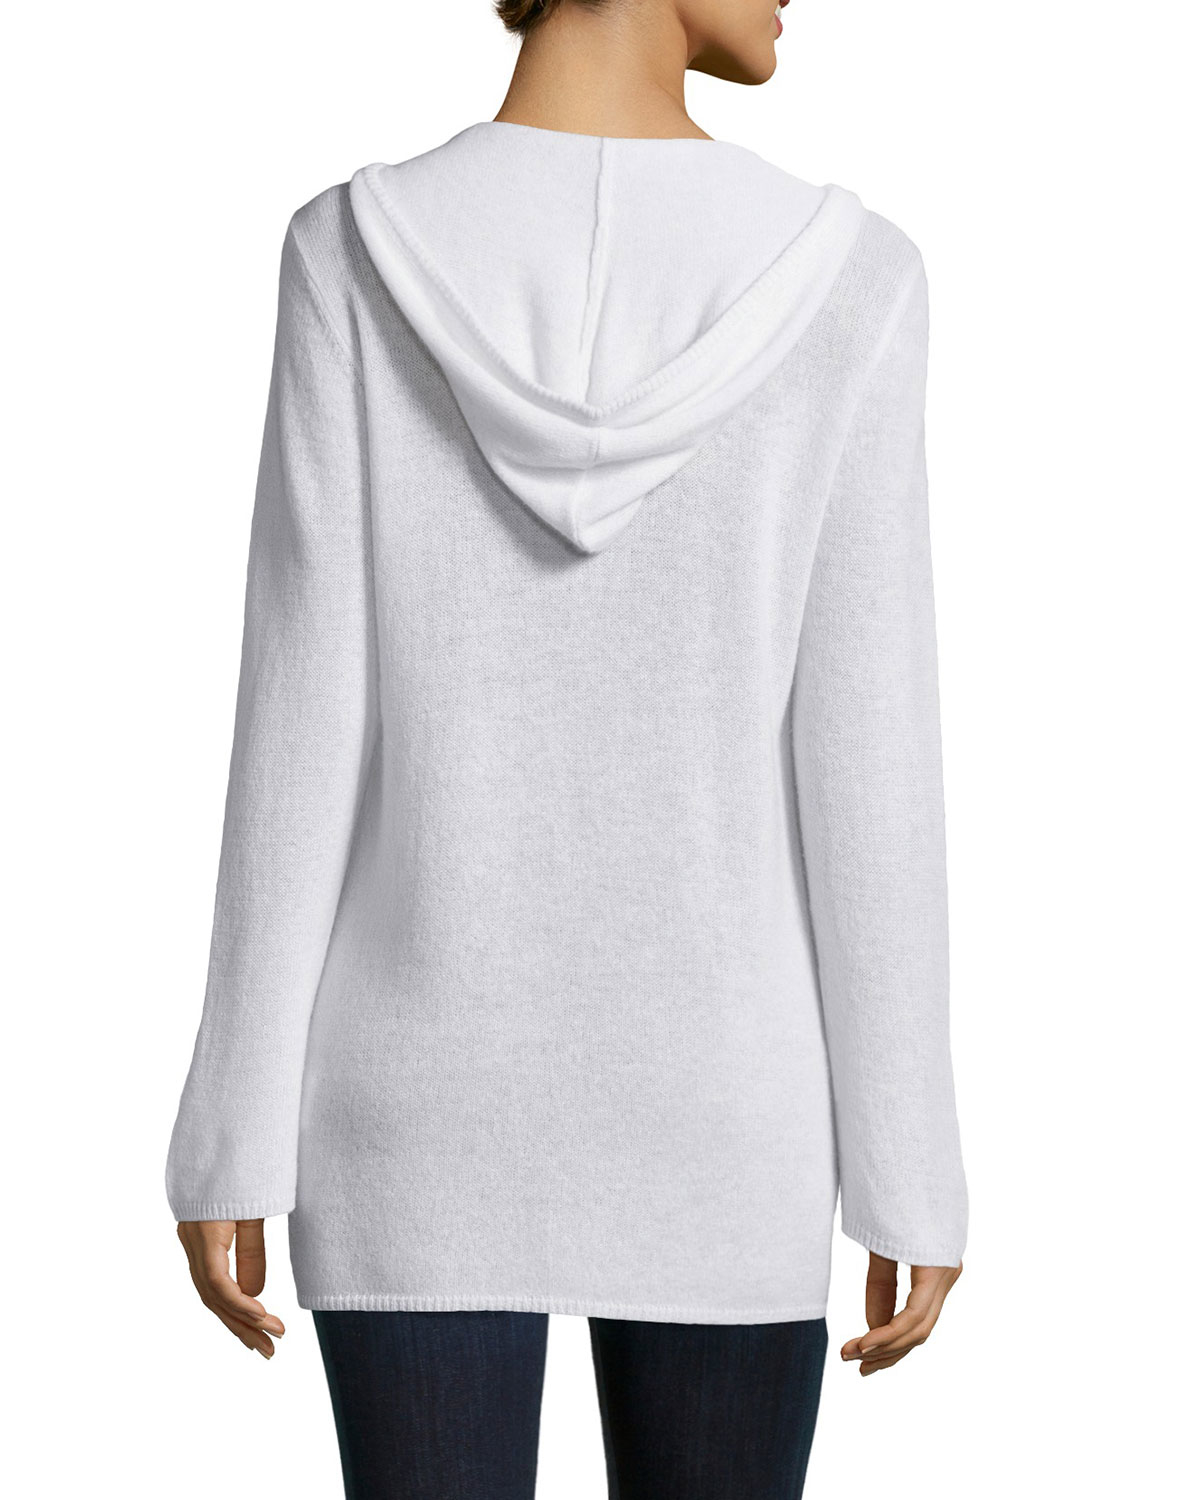 Minnie rose Cashmere Hooded Duster Cardigan in White | Lyst